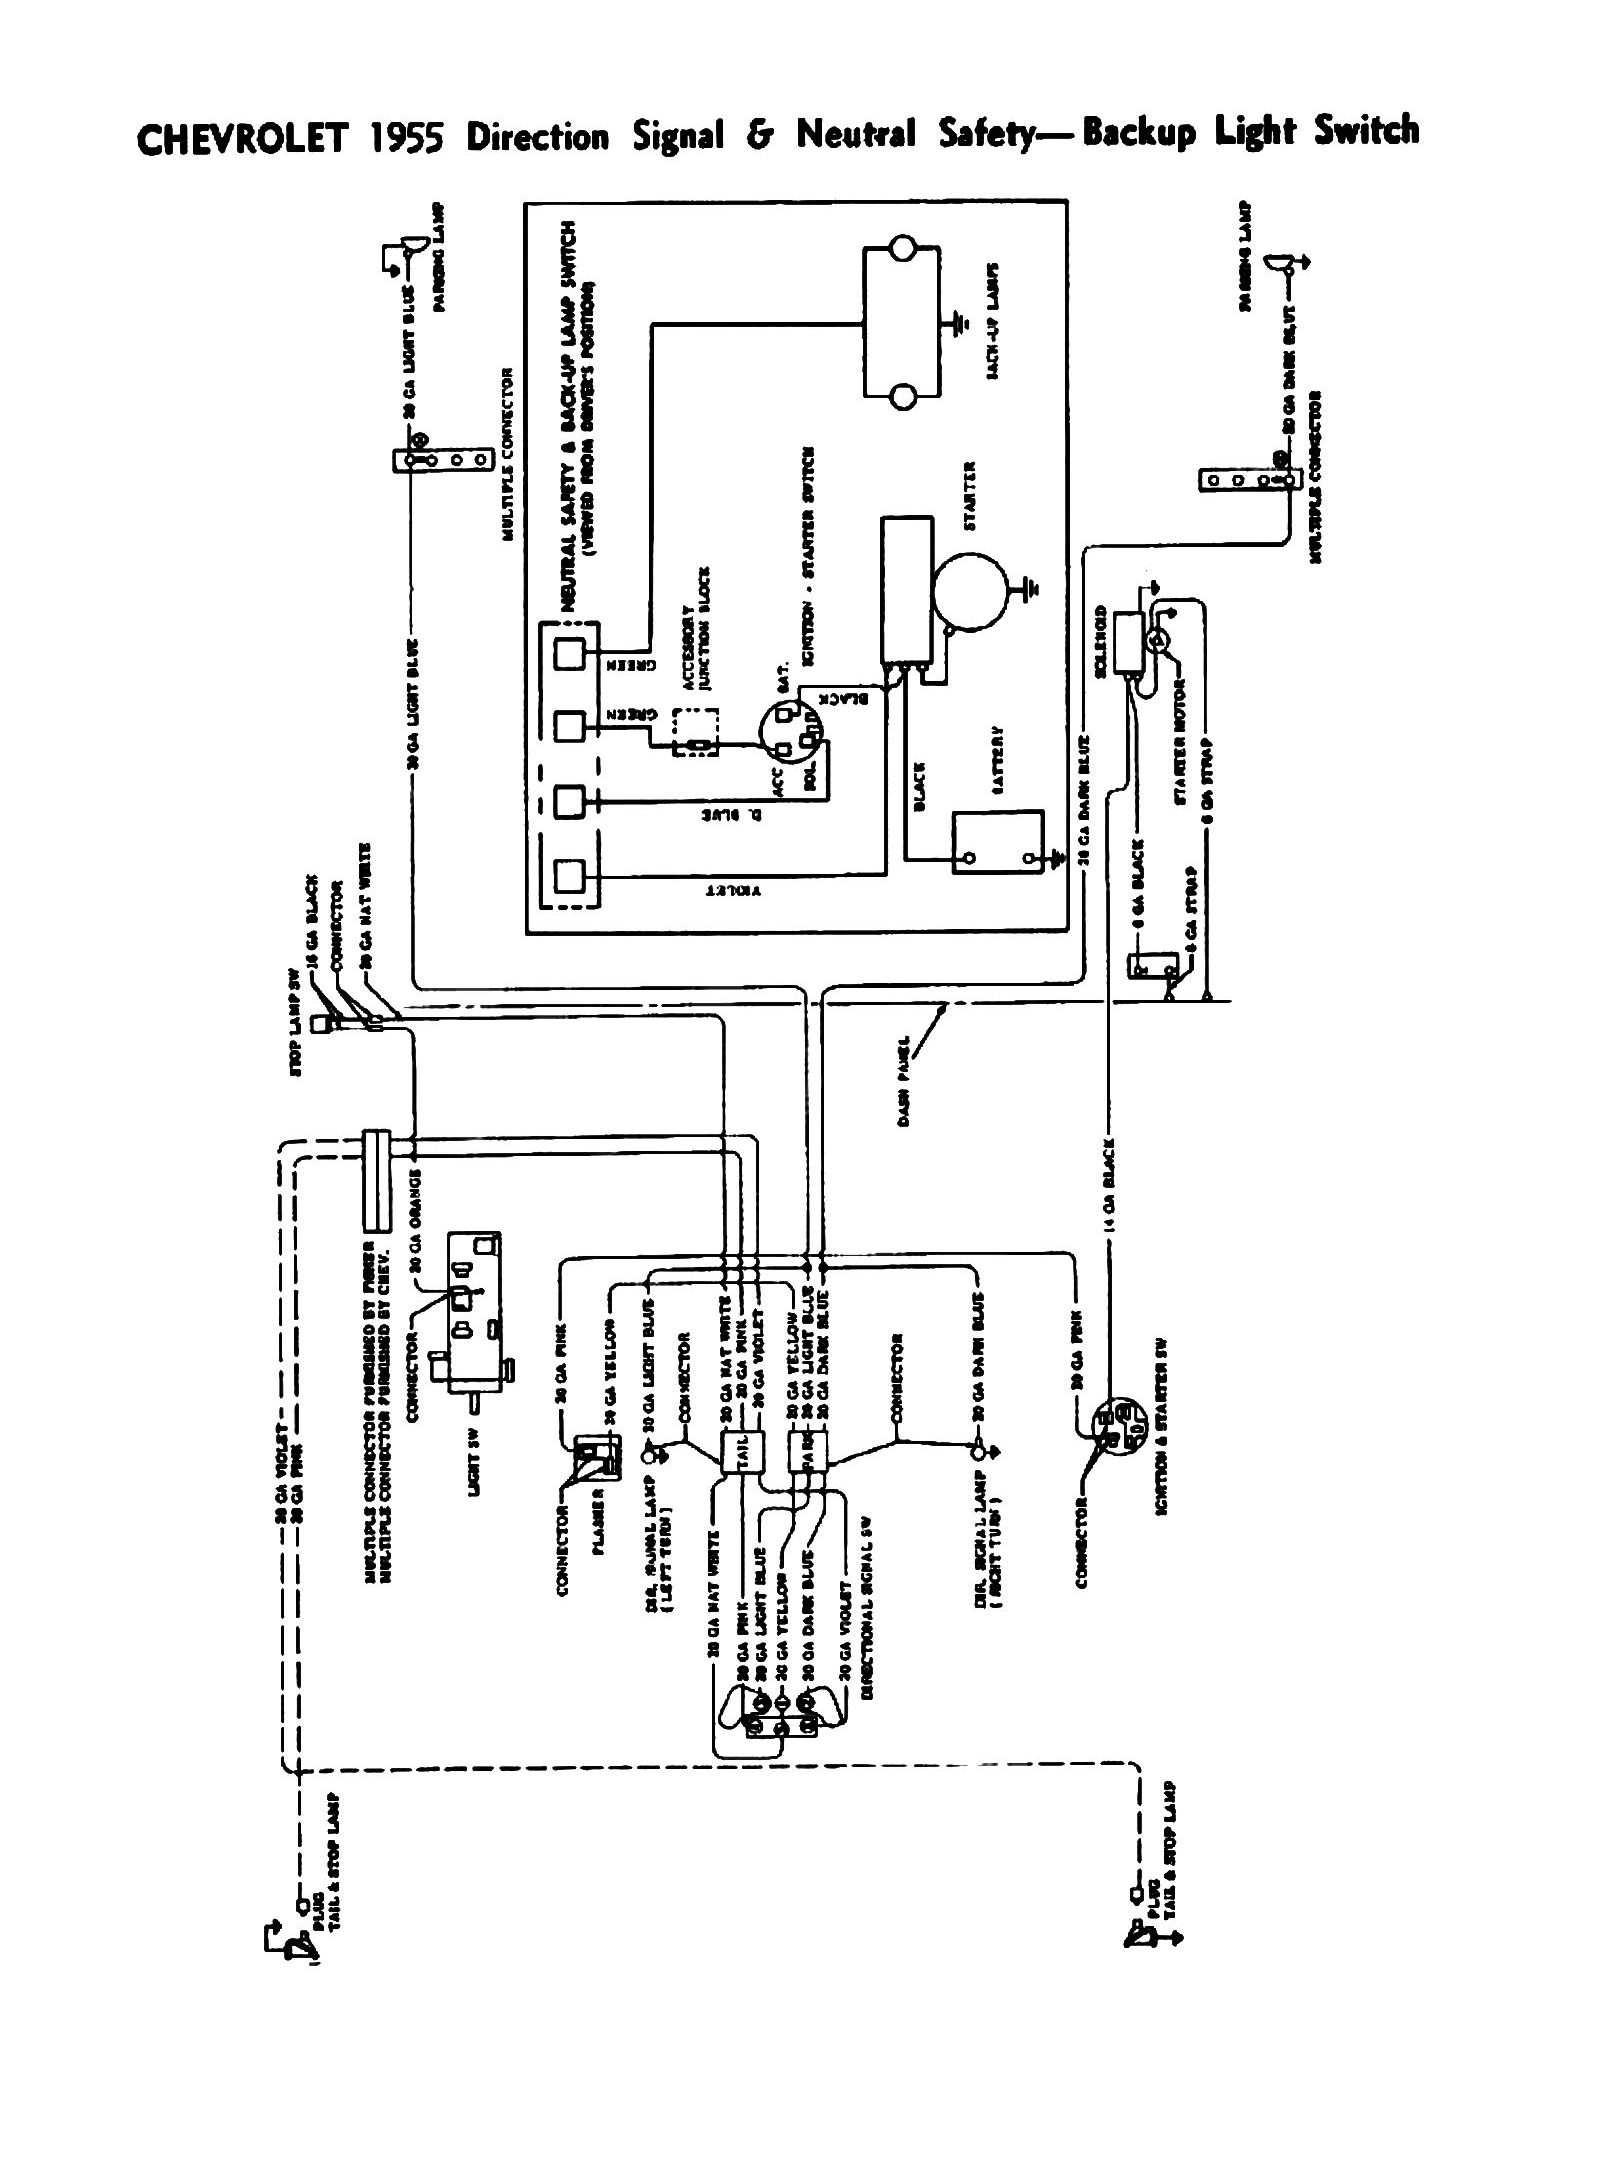 Chevy Wiring diagrams 1958 chevy truck wiring diagram for signal 